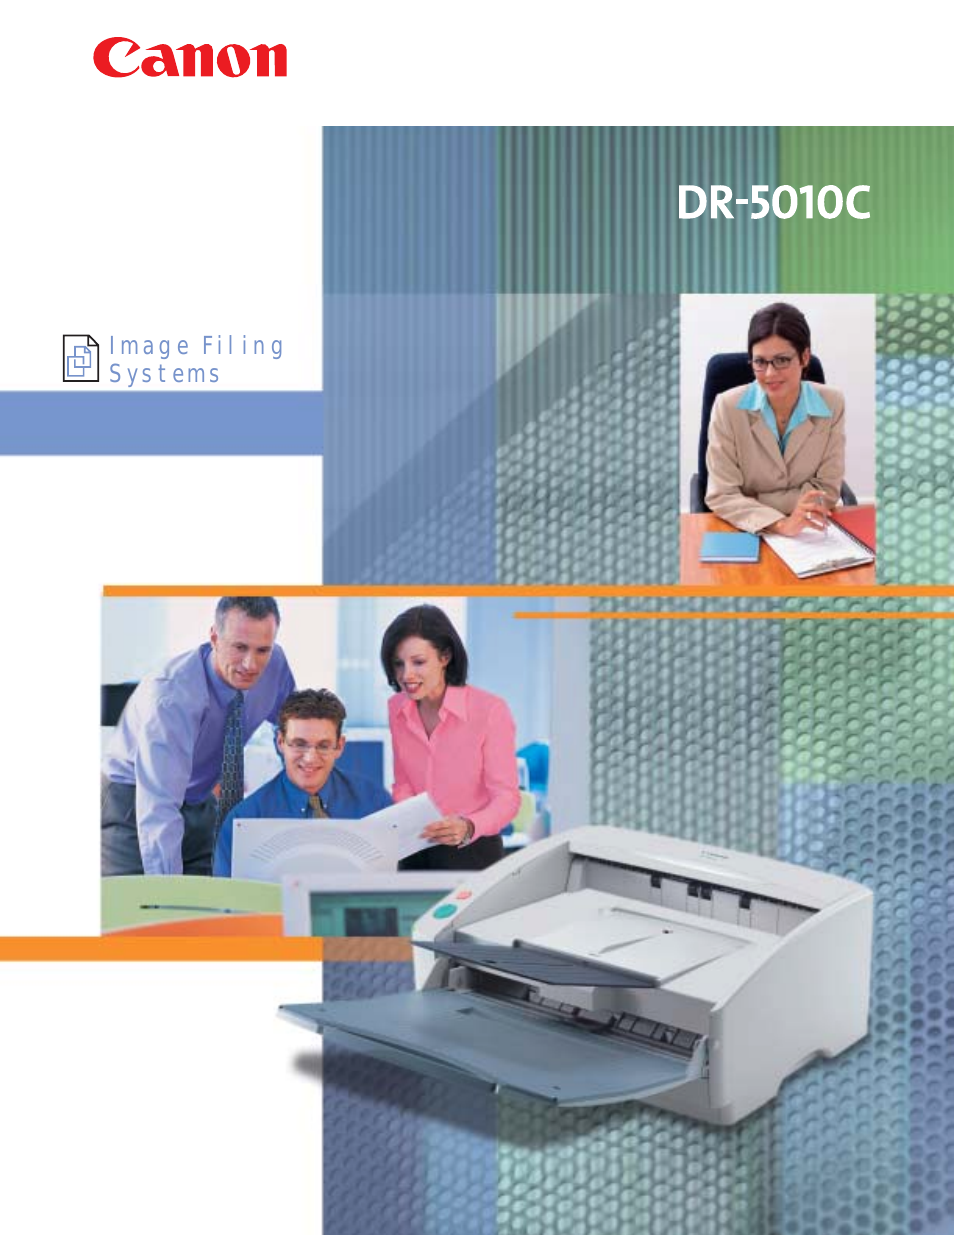 Image Filing Systems DR-5010C